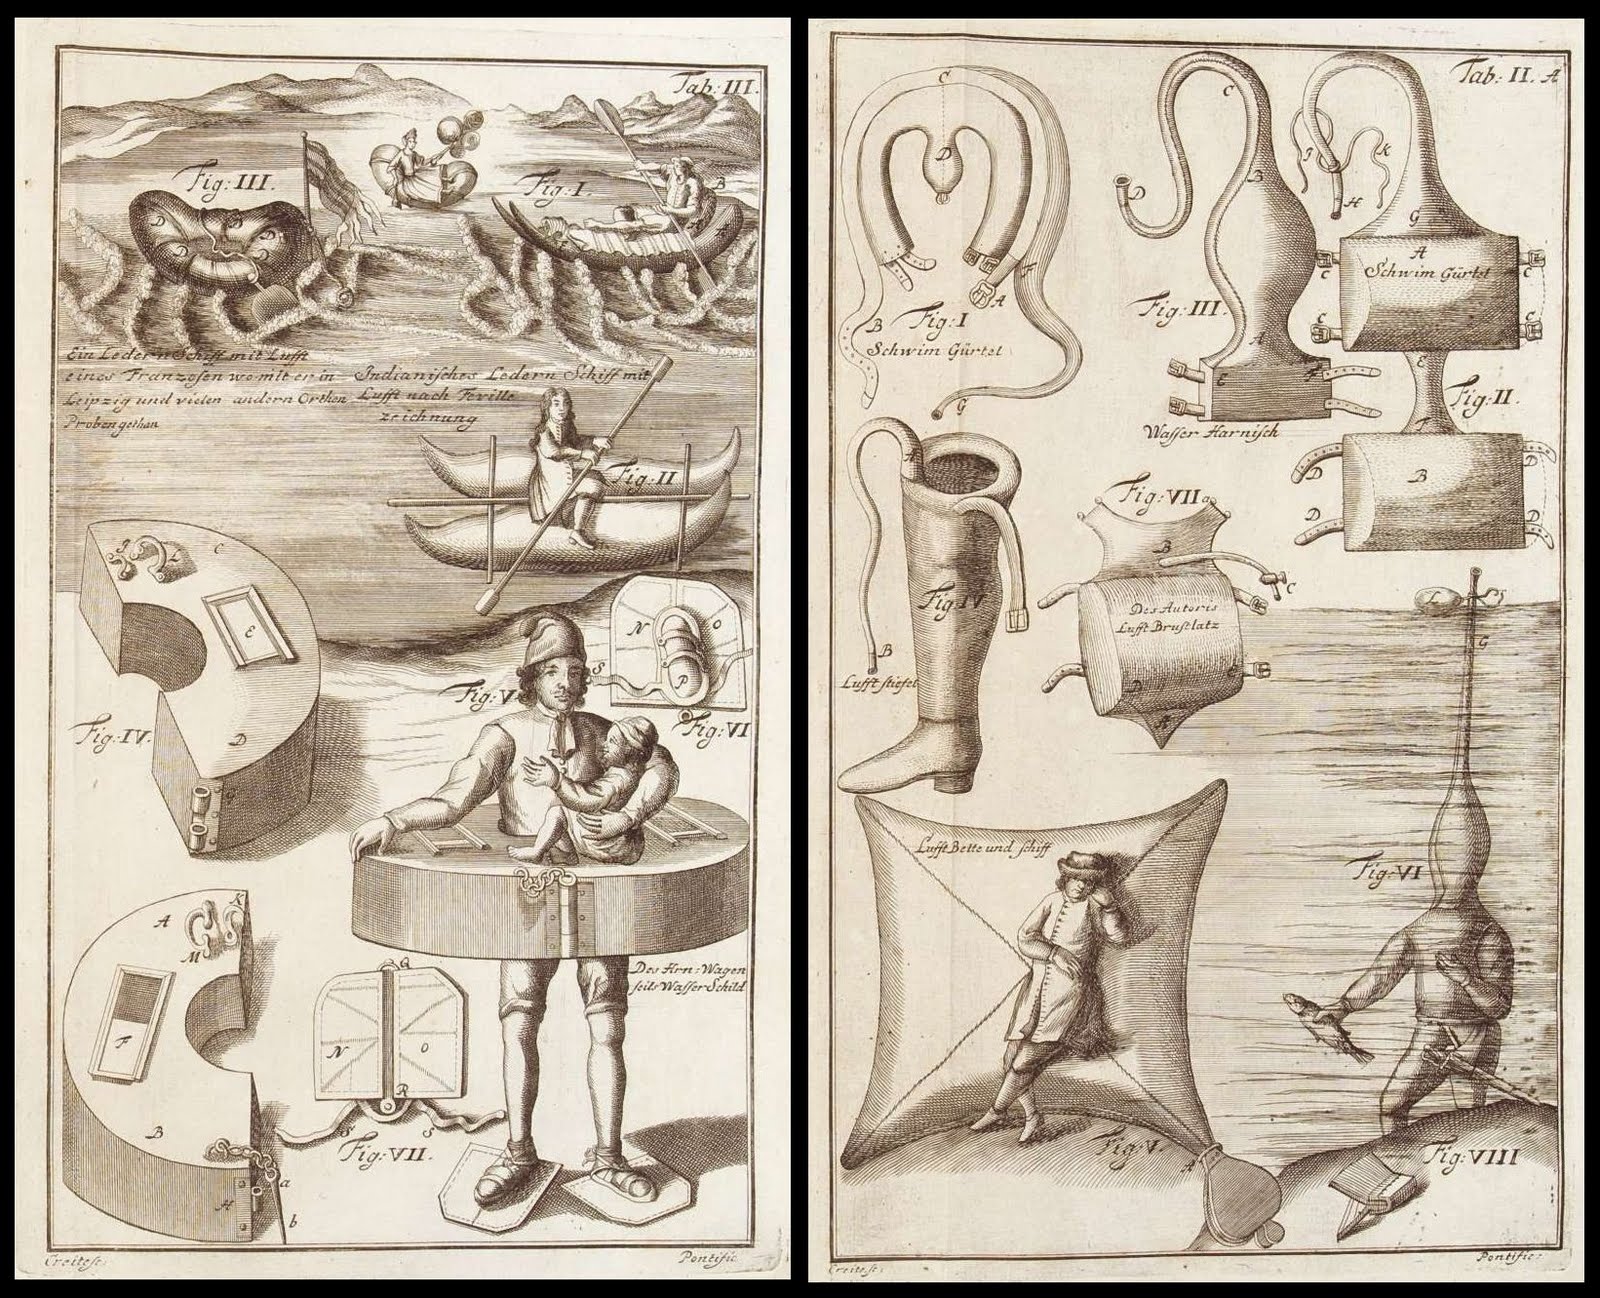 18th cent. engravings of scuba and flotation devices